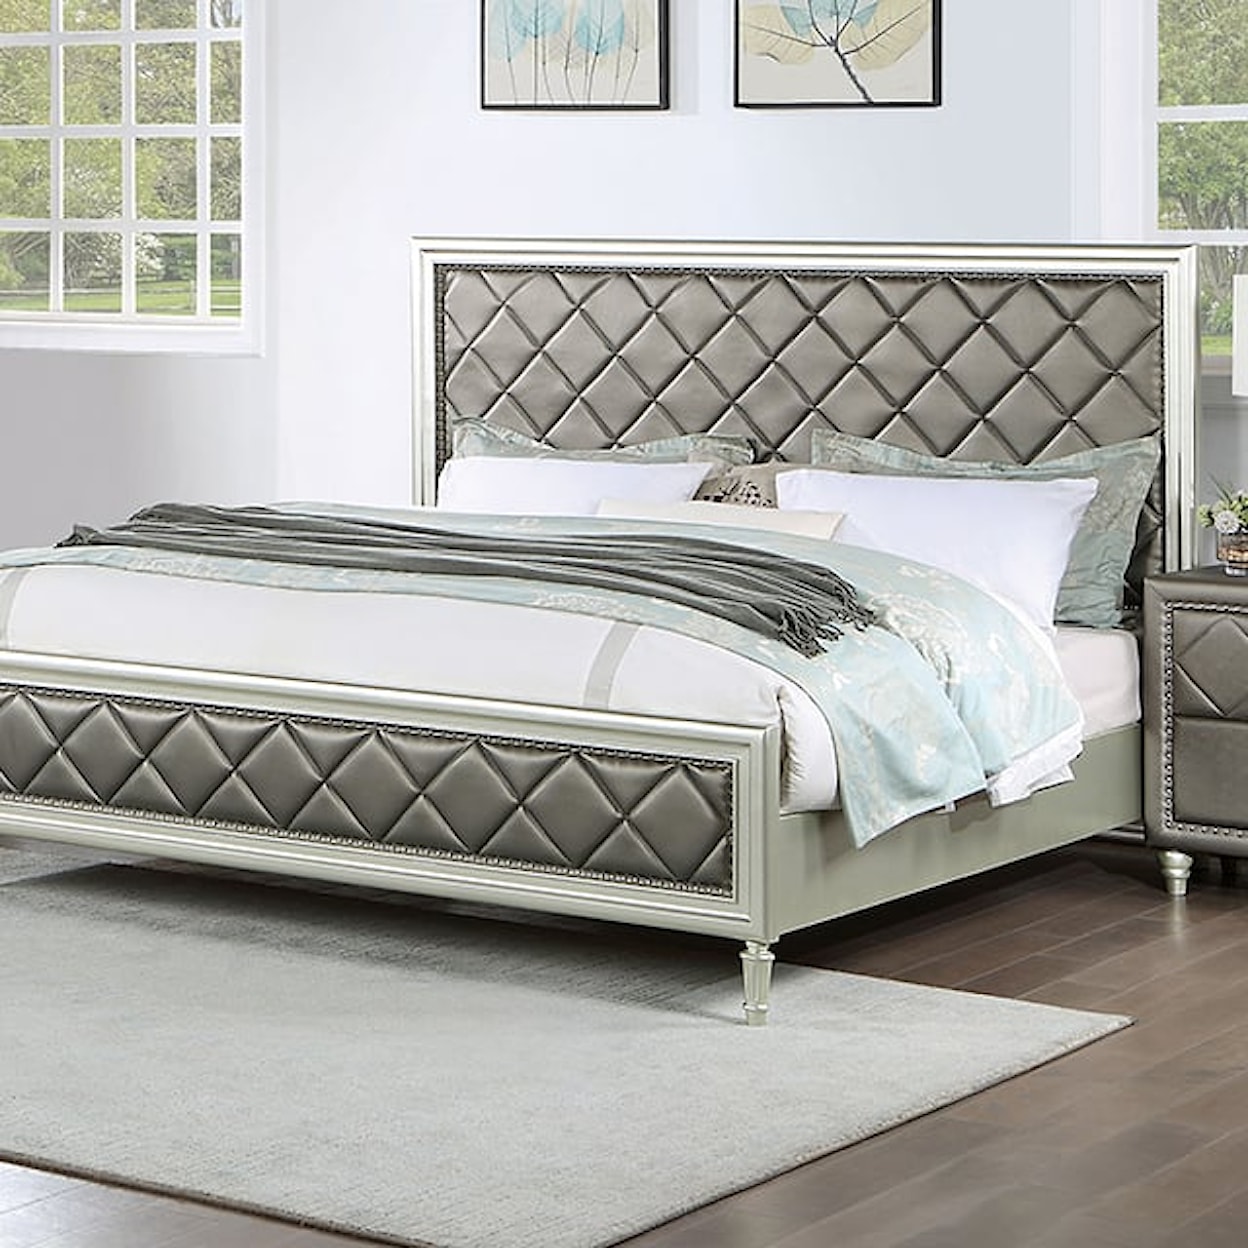 Furniture of America Xandria Upholstered Queen Bed with Diamond Tufting